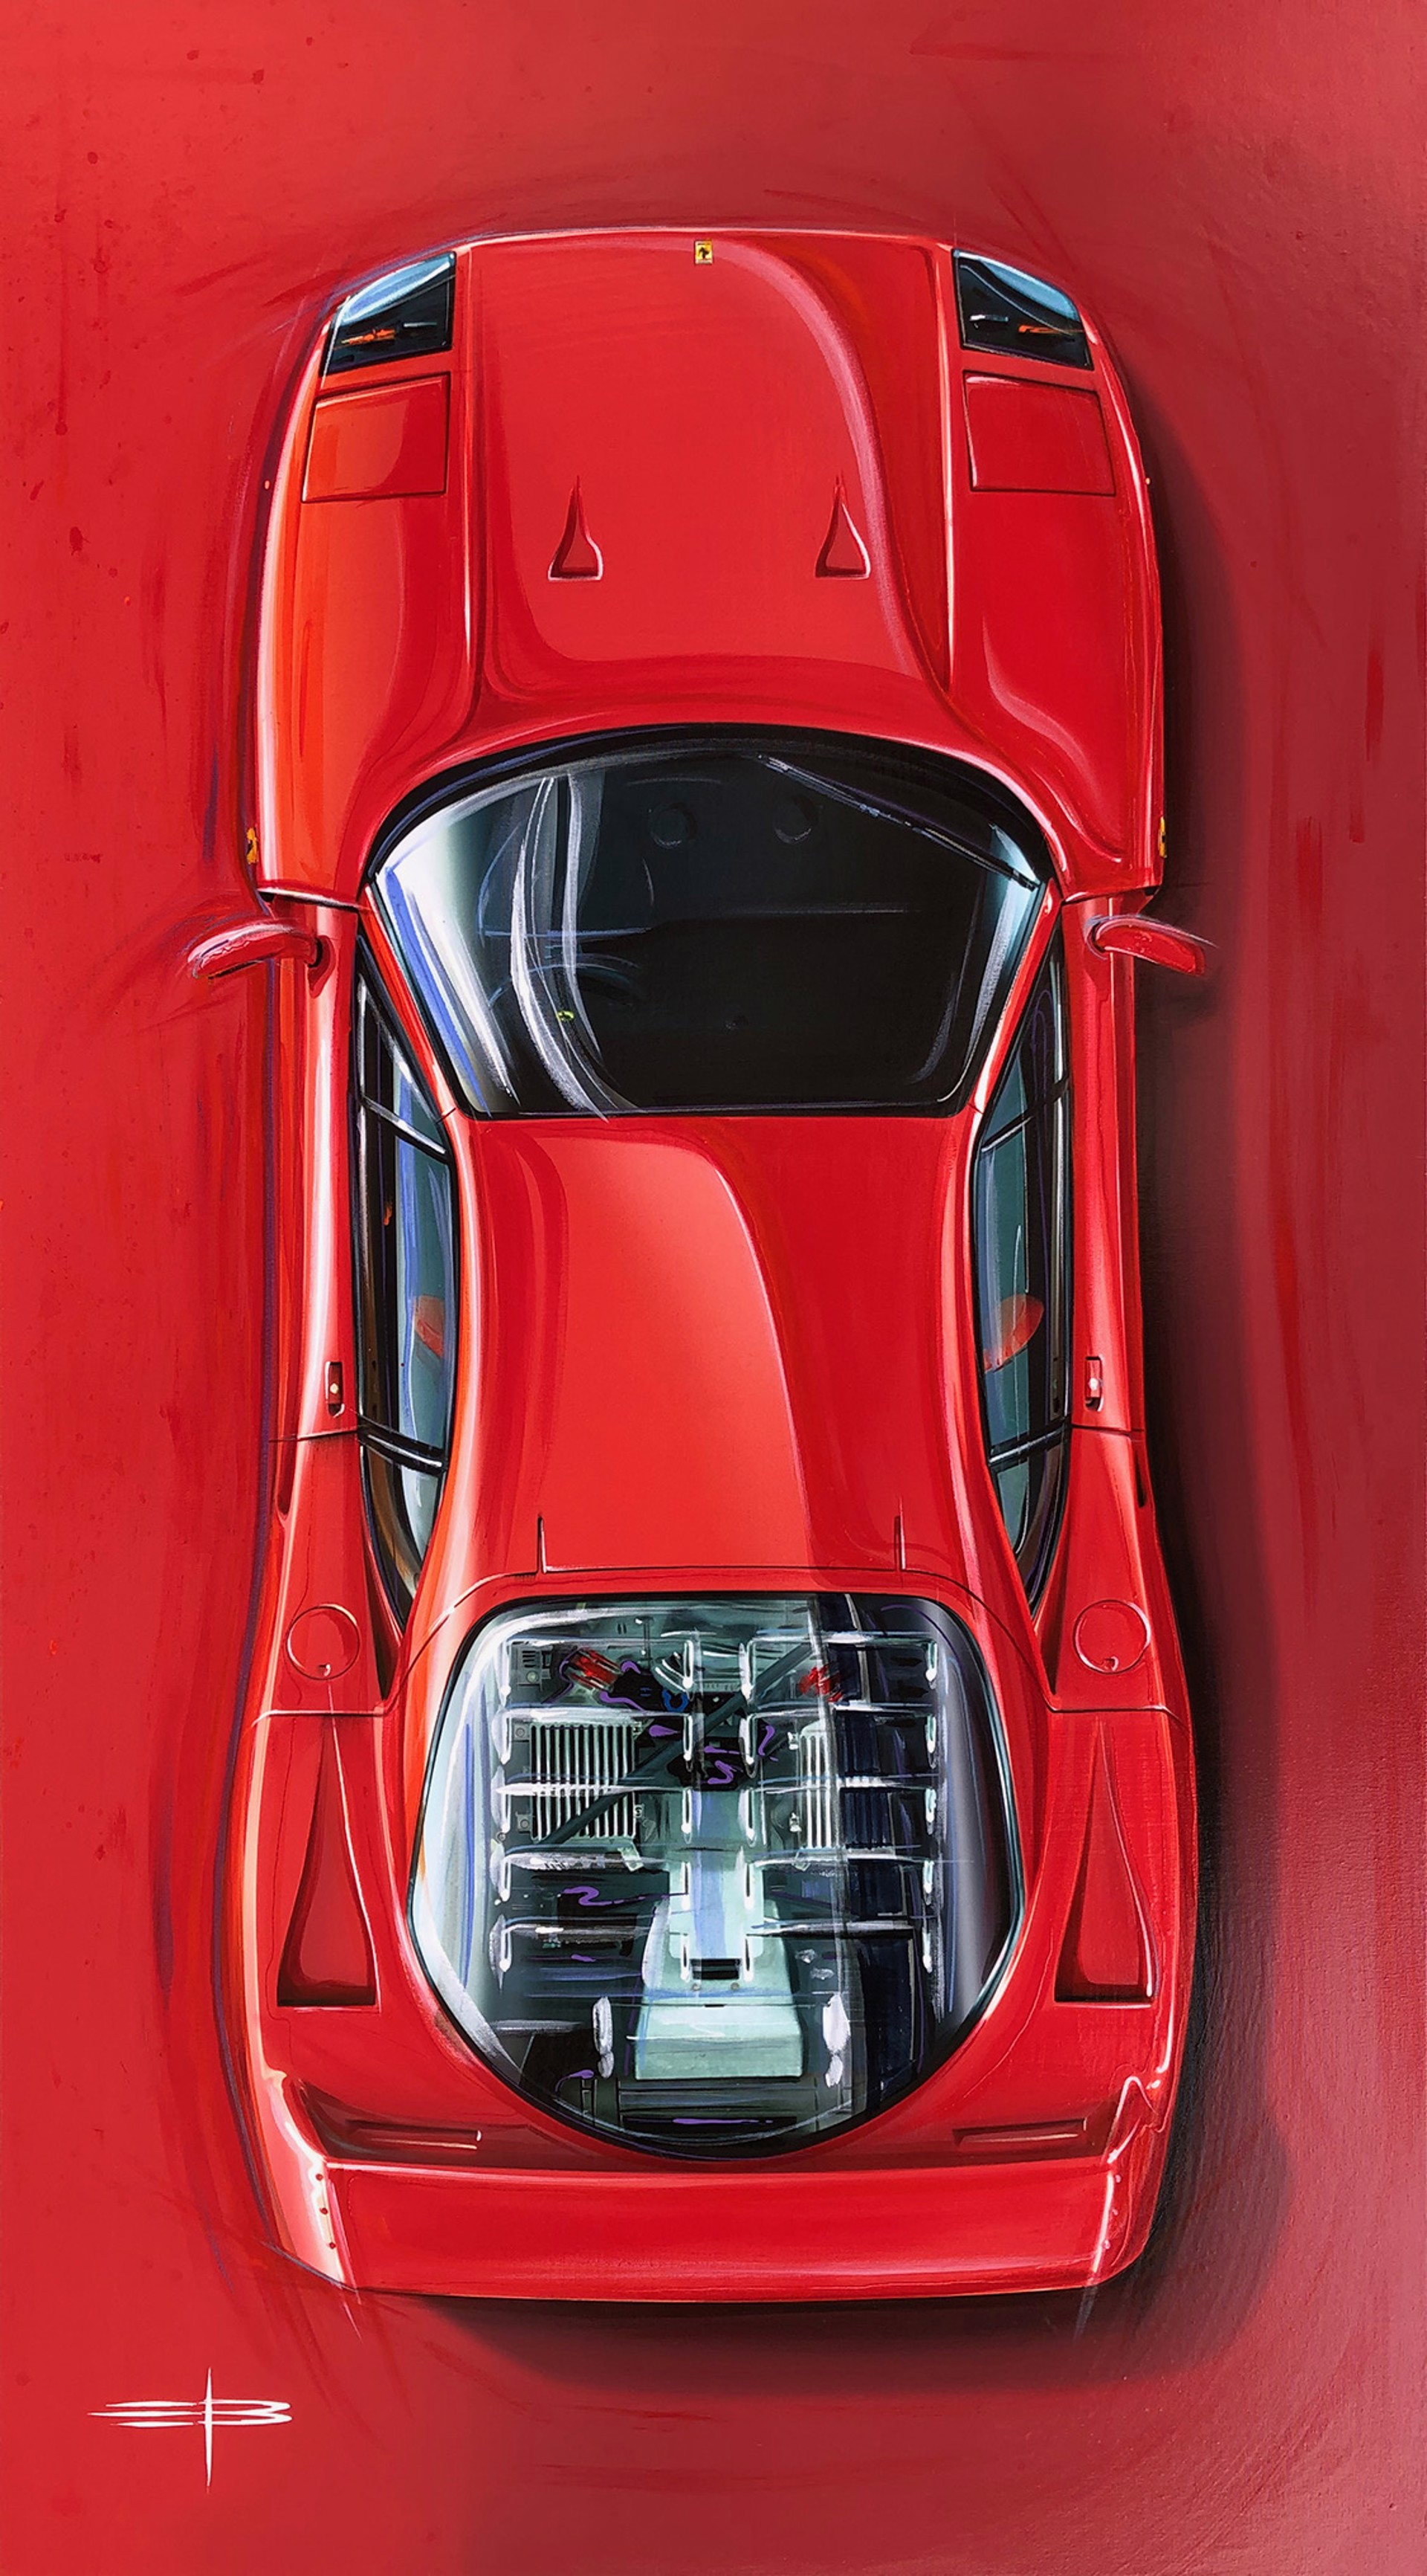 "From Above- 1987 Ferrari F40" by Emile Bouret